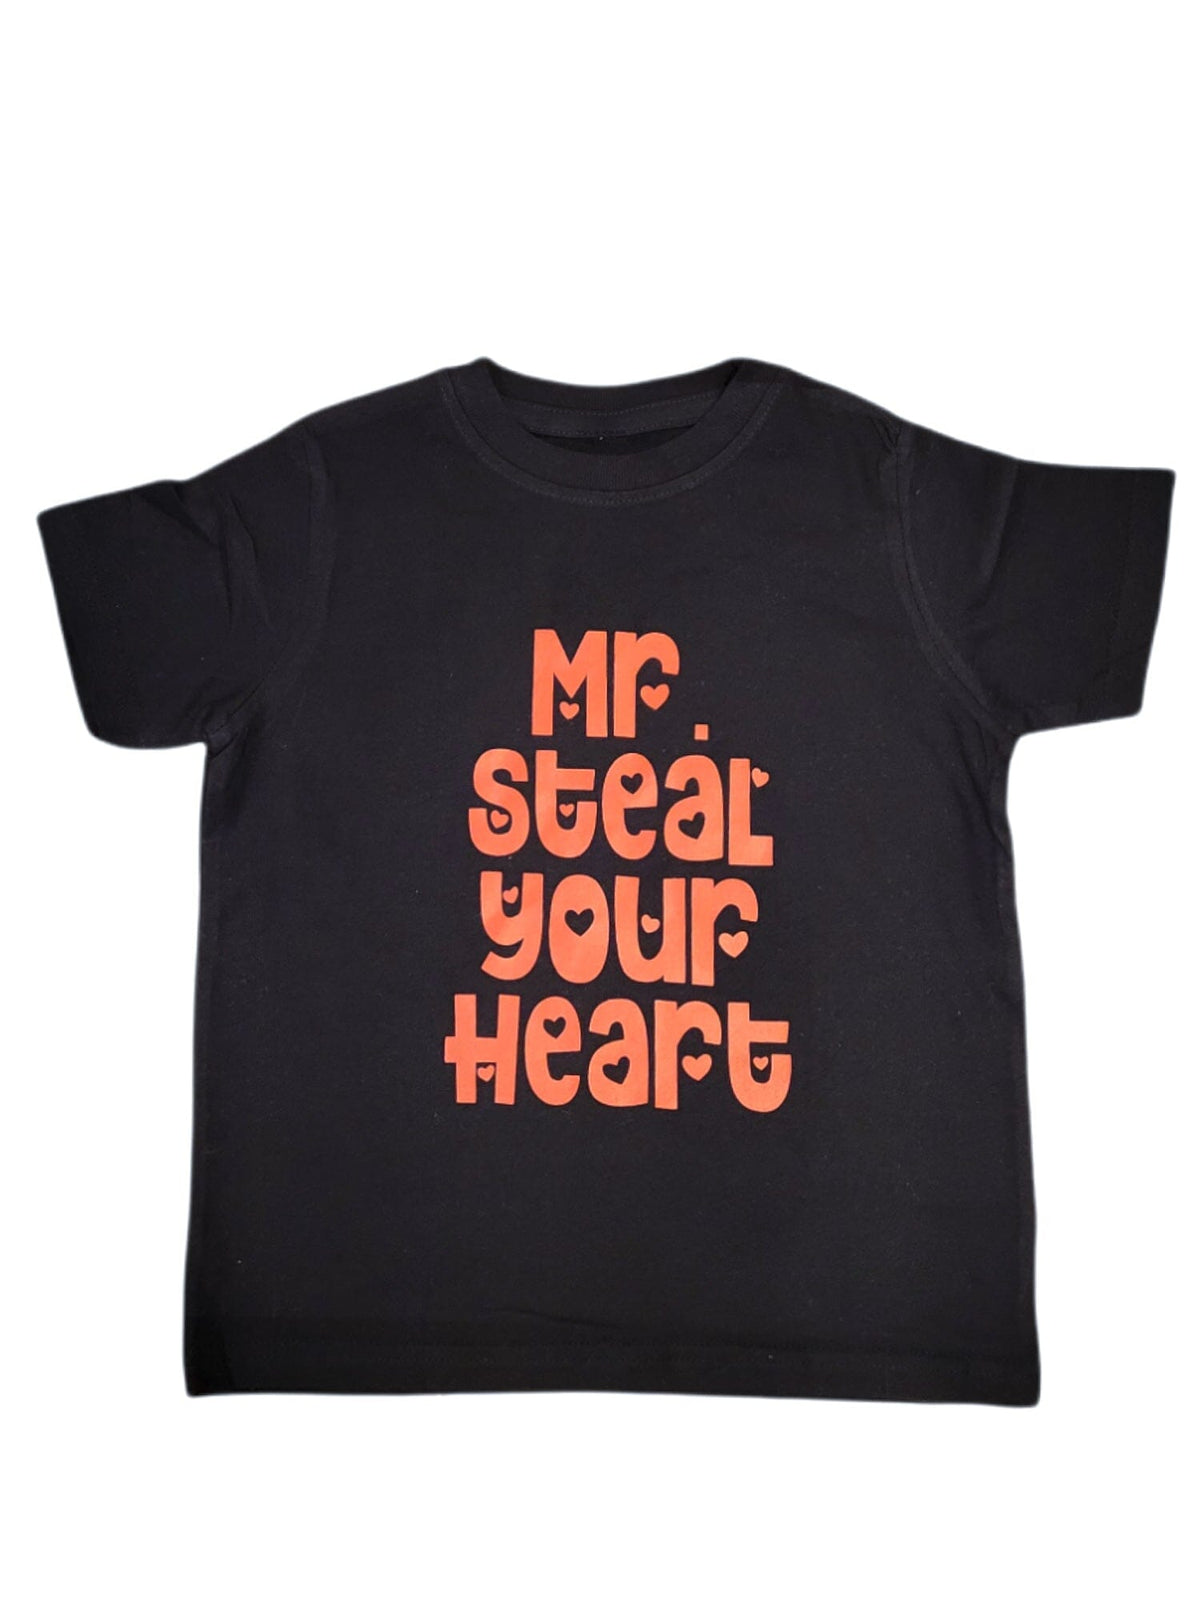 Mr. Steal Your Heart tee